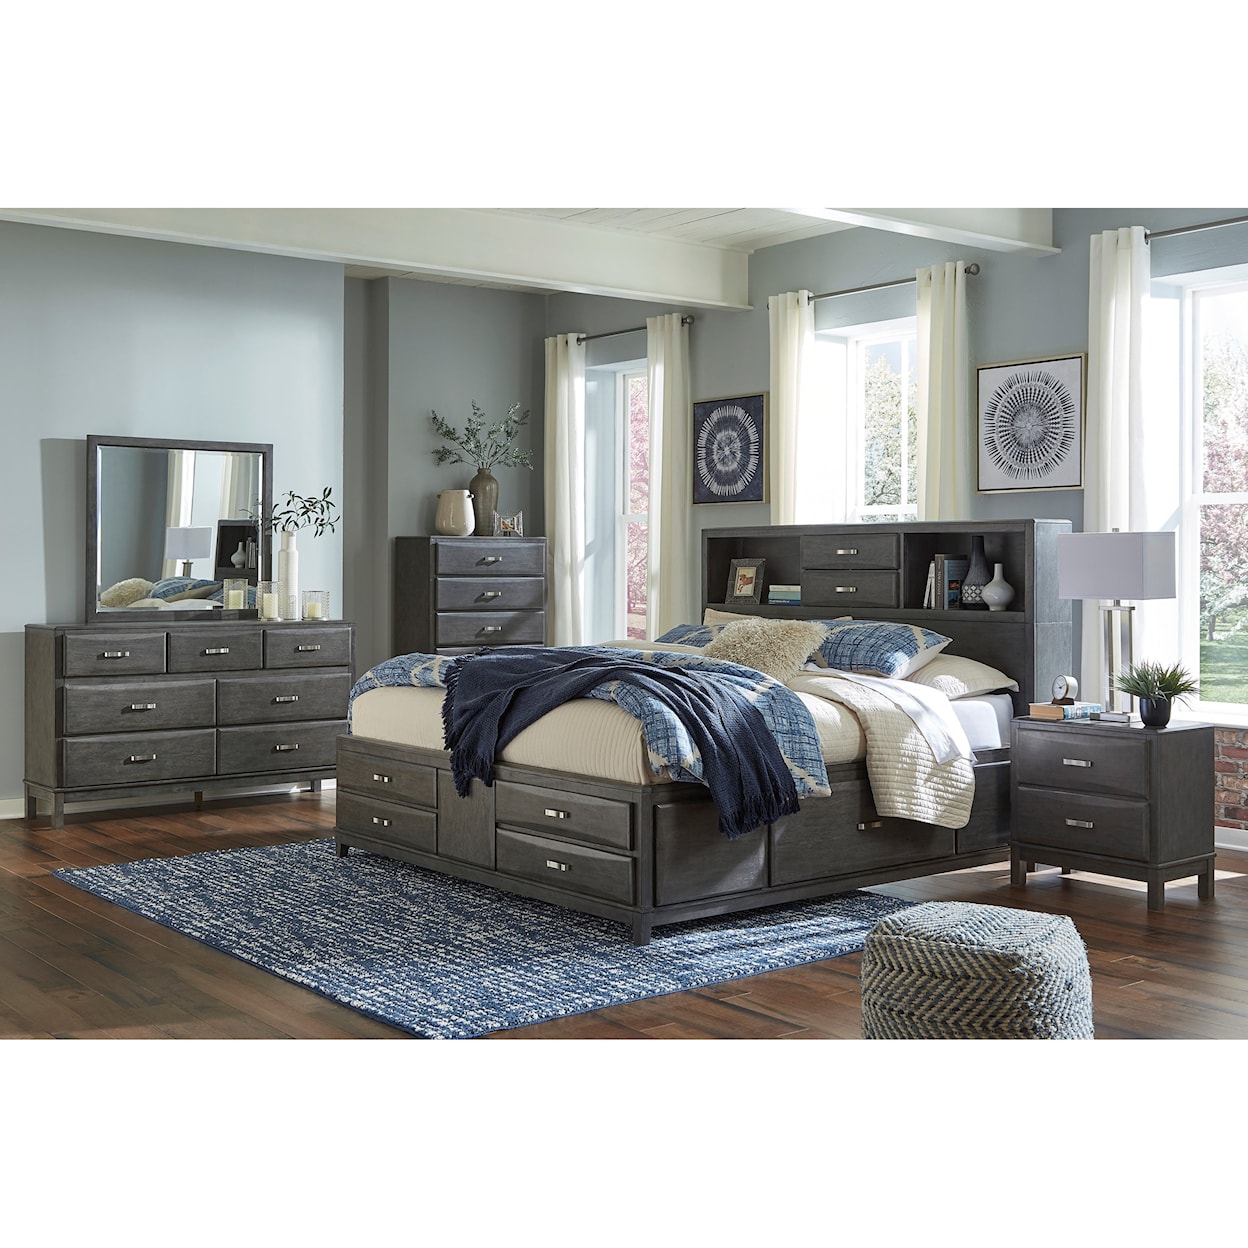 Signature Design by Ashley Caitbrook Queen Bedroom Group